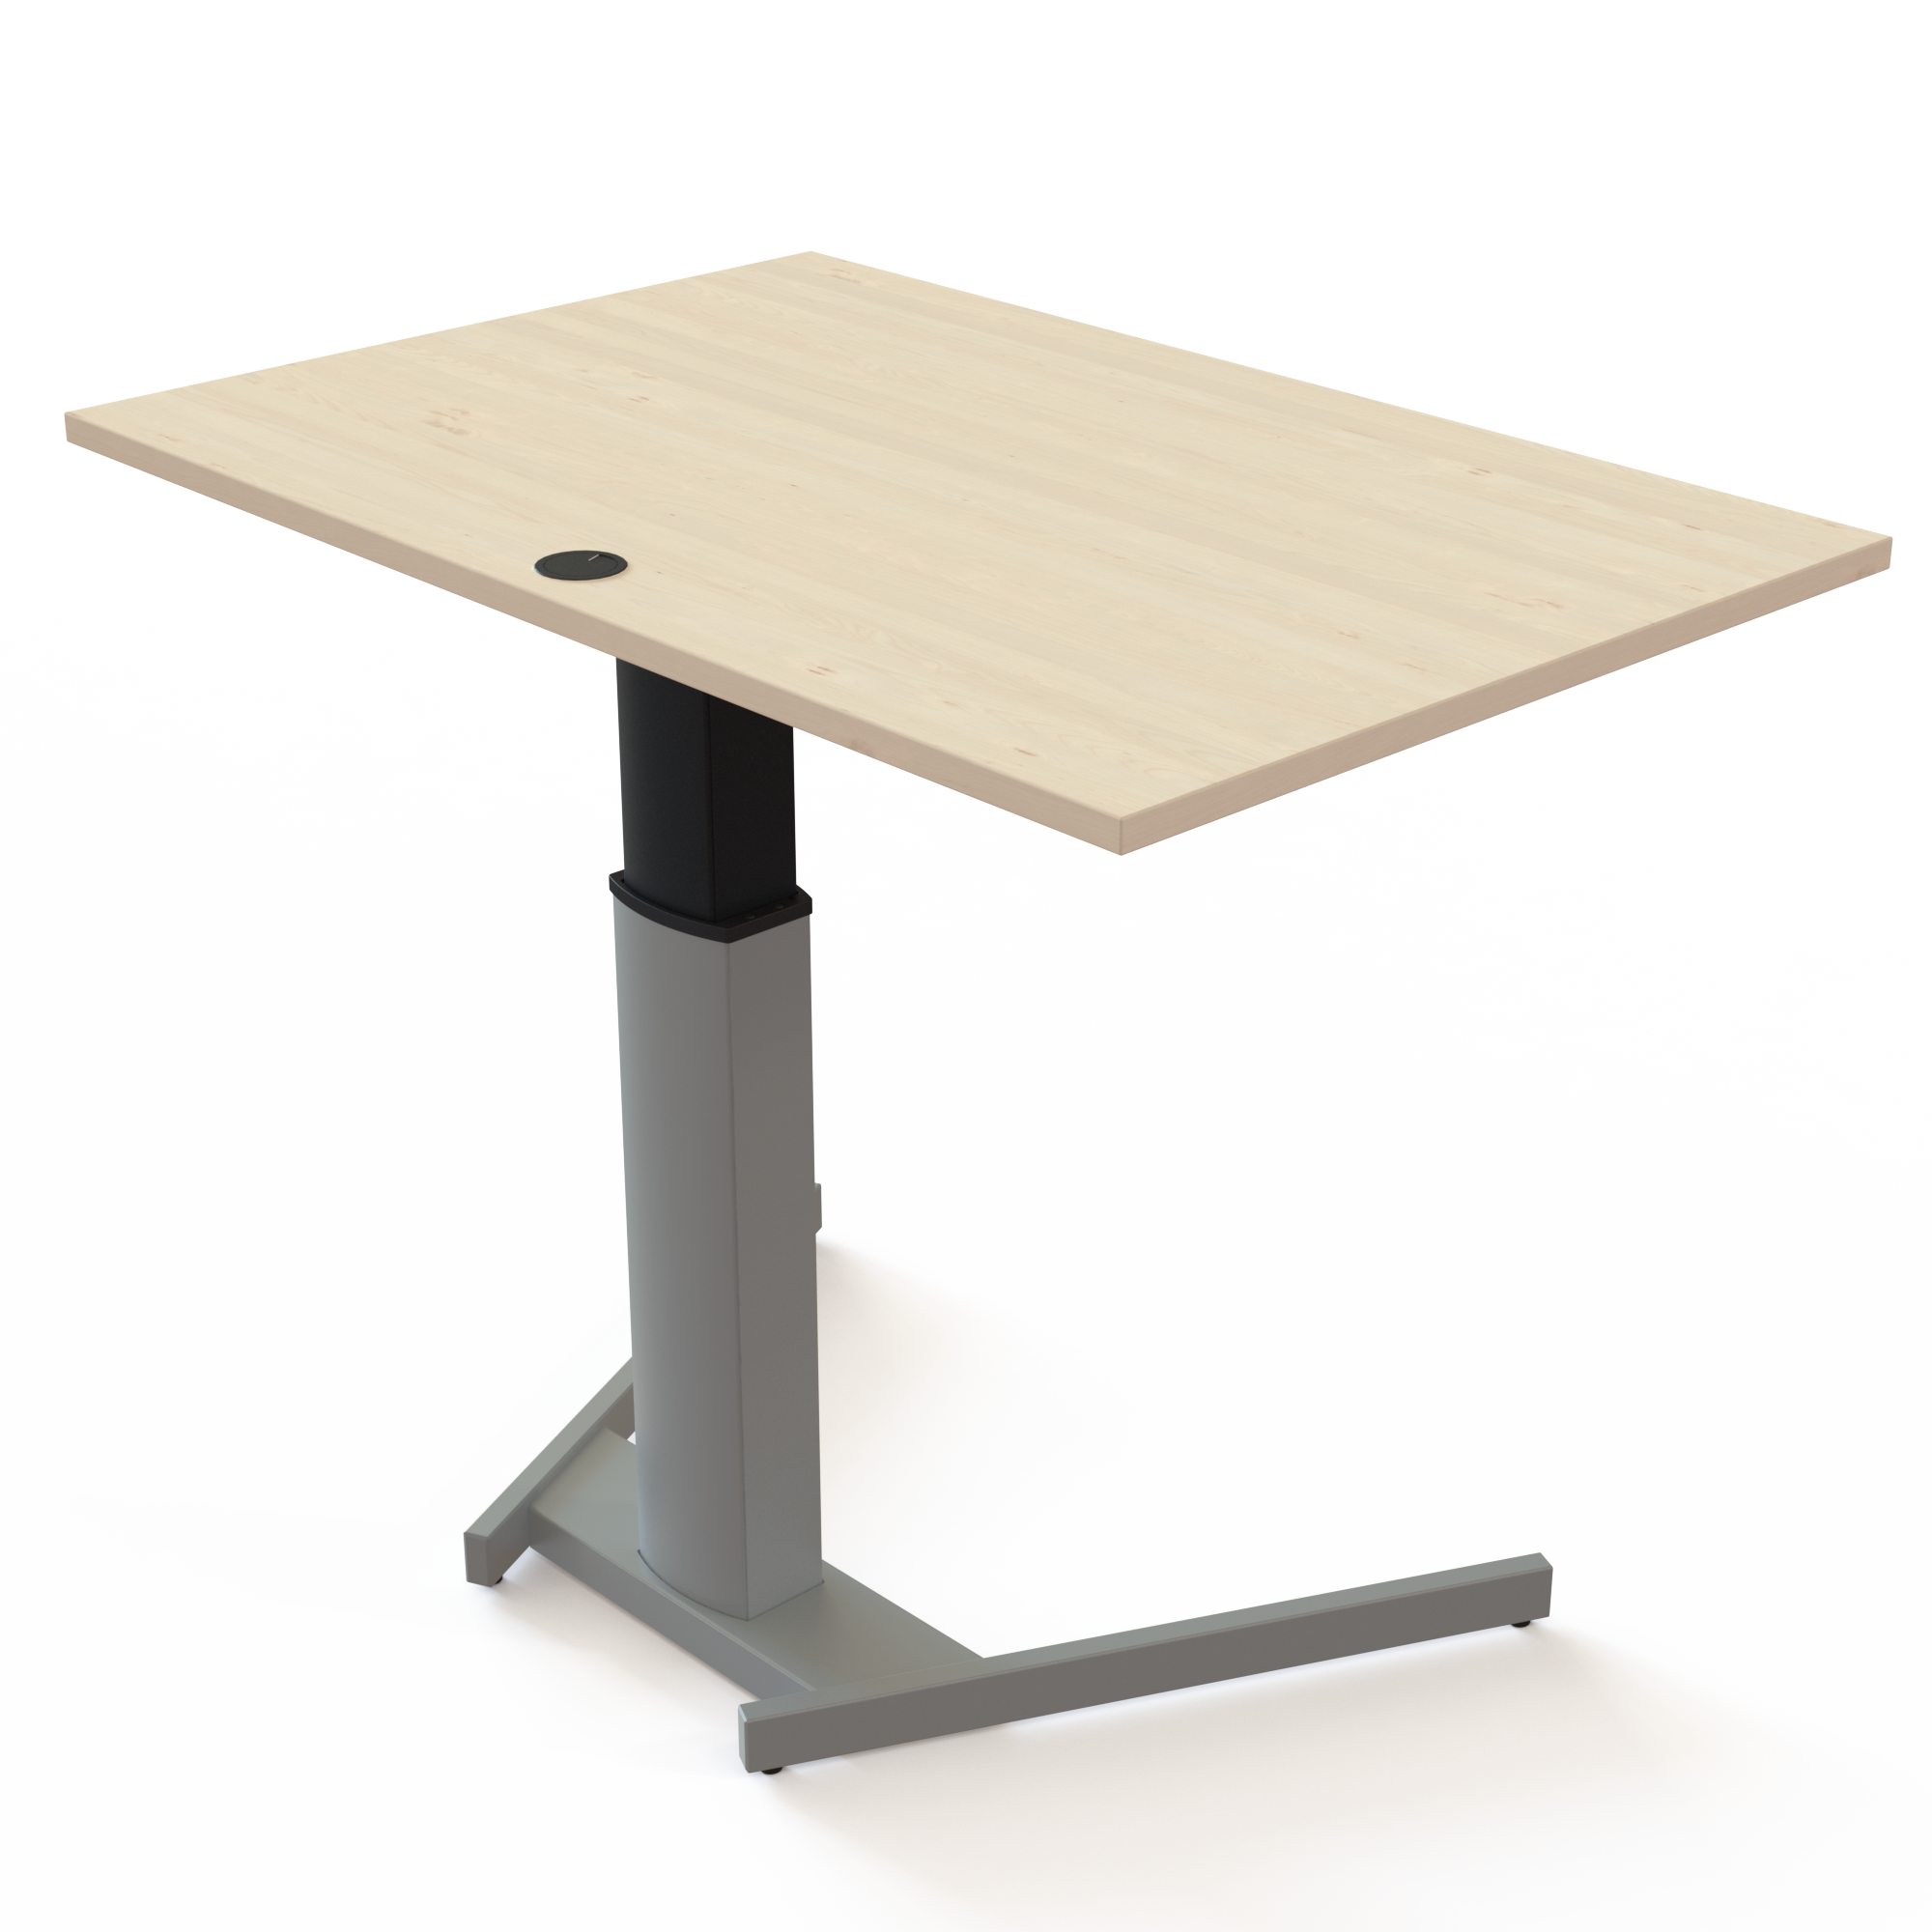 Electric Adjustable Desk | 120x80 cm | Maple with silver frame